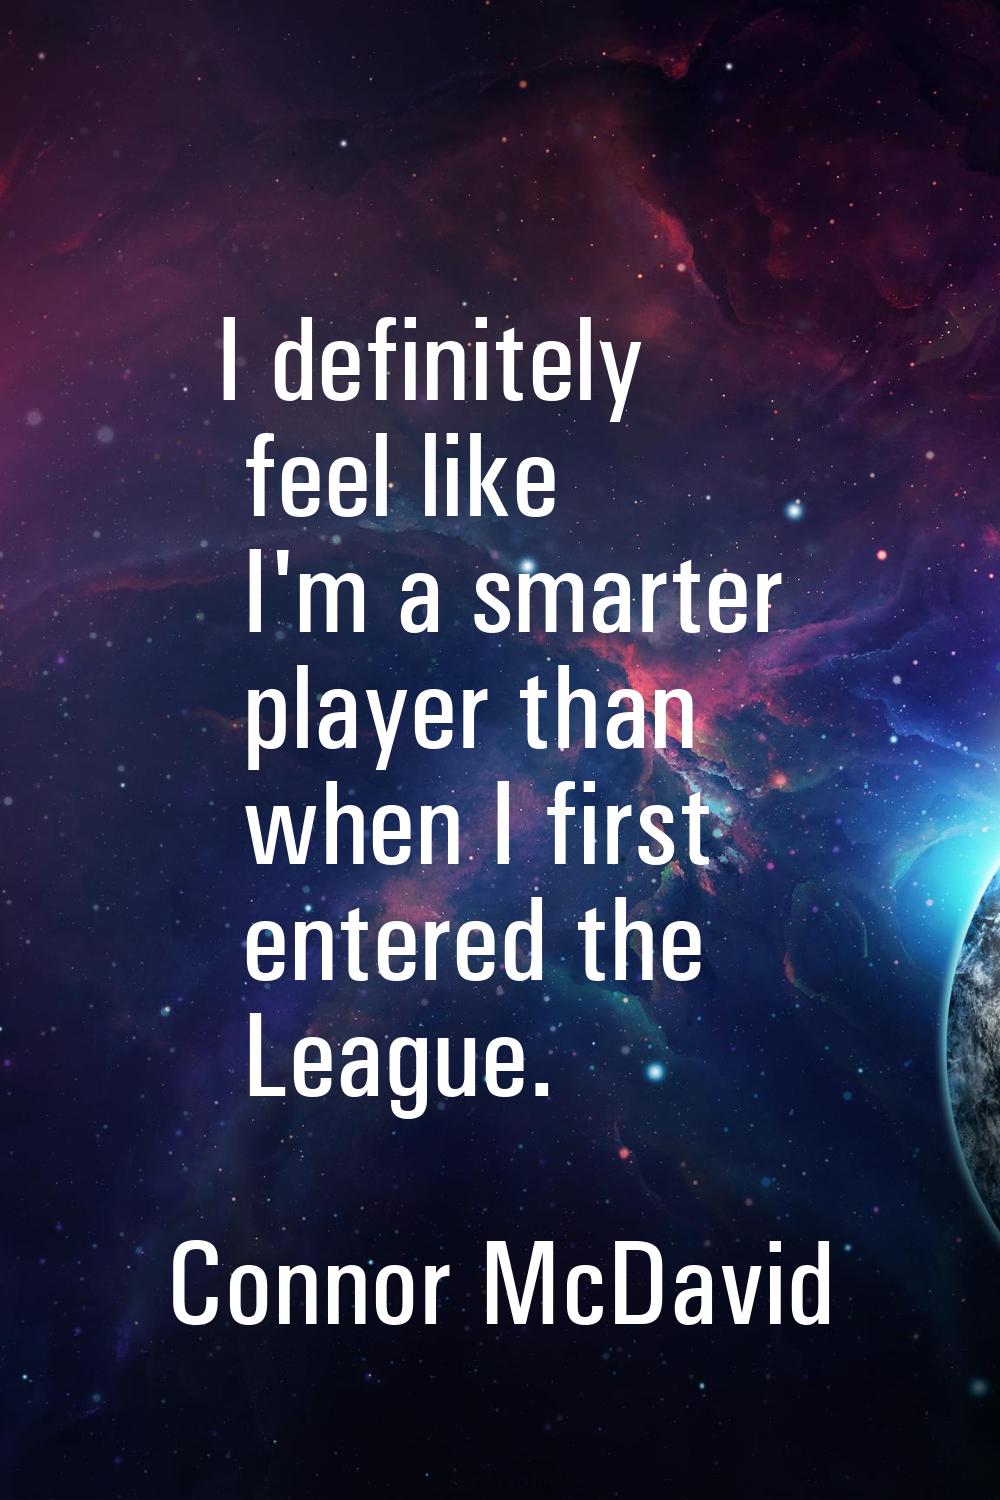 I definitely feel like I'm a smarter player than when I first entered the League.